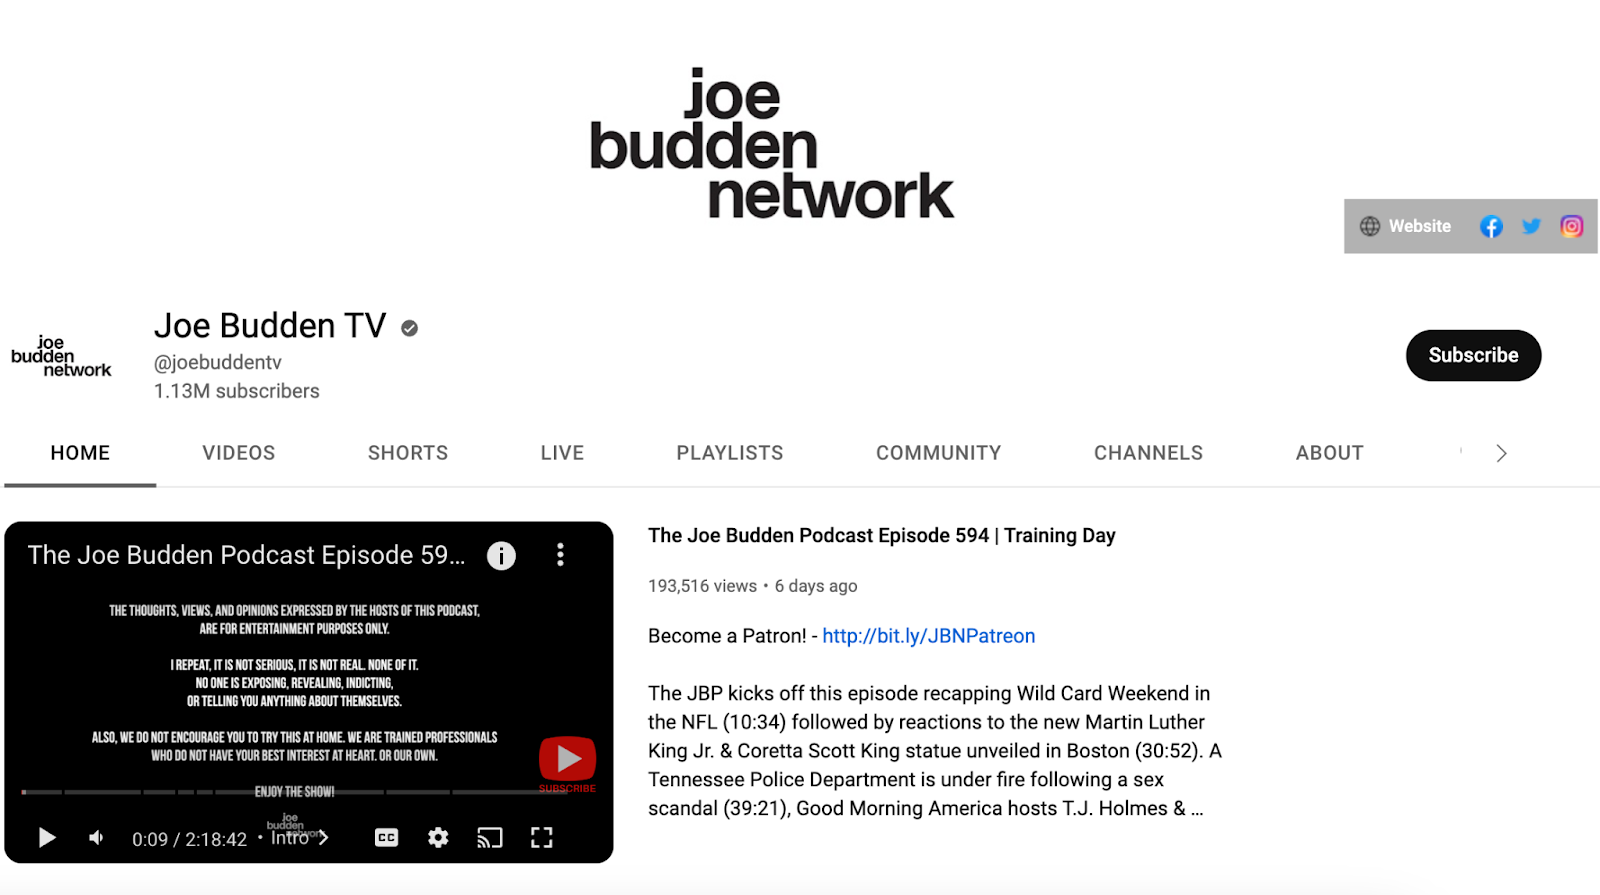 Joe Budden Podcast: A Look at the Reach and Success of the Popular Podcast